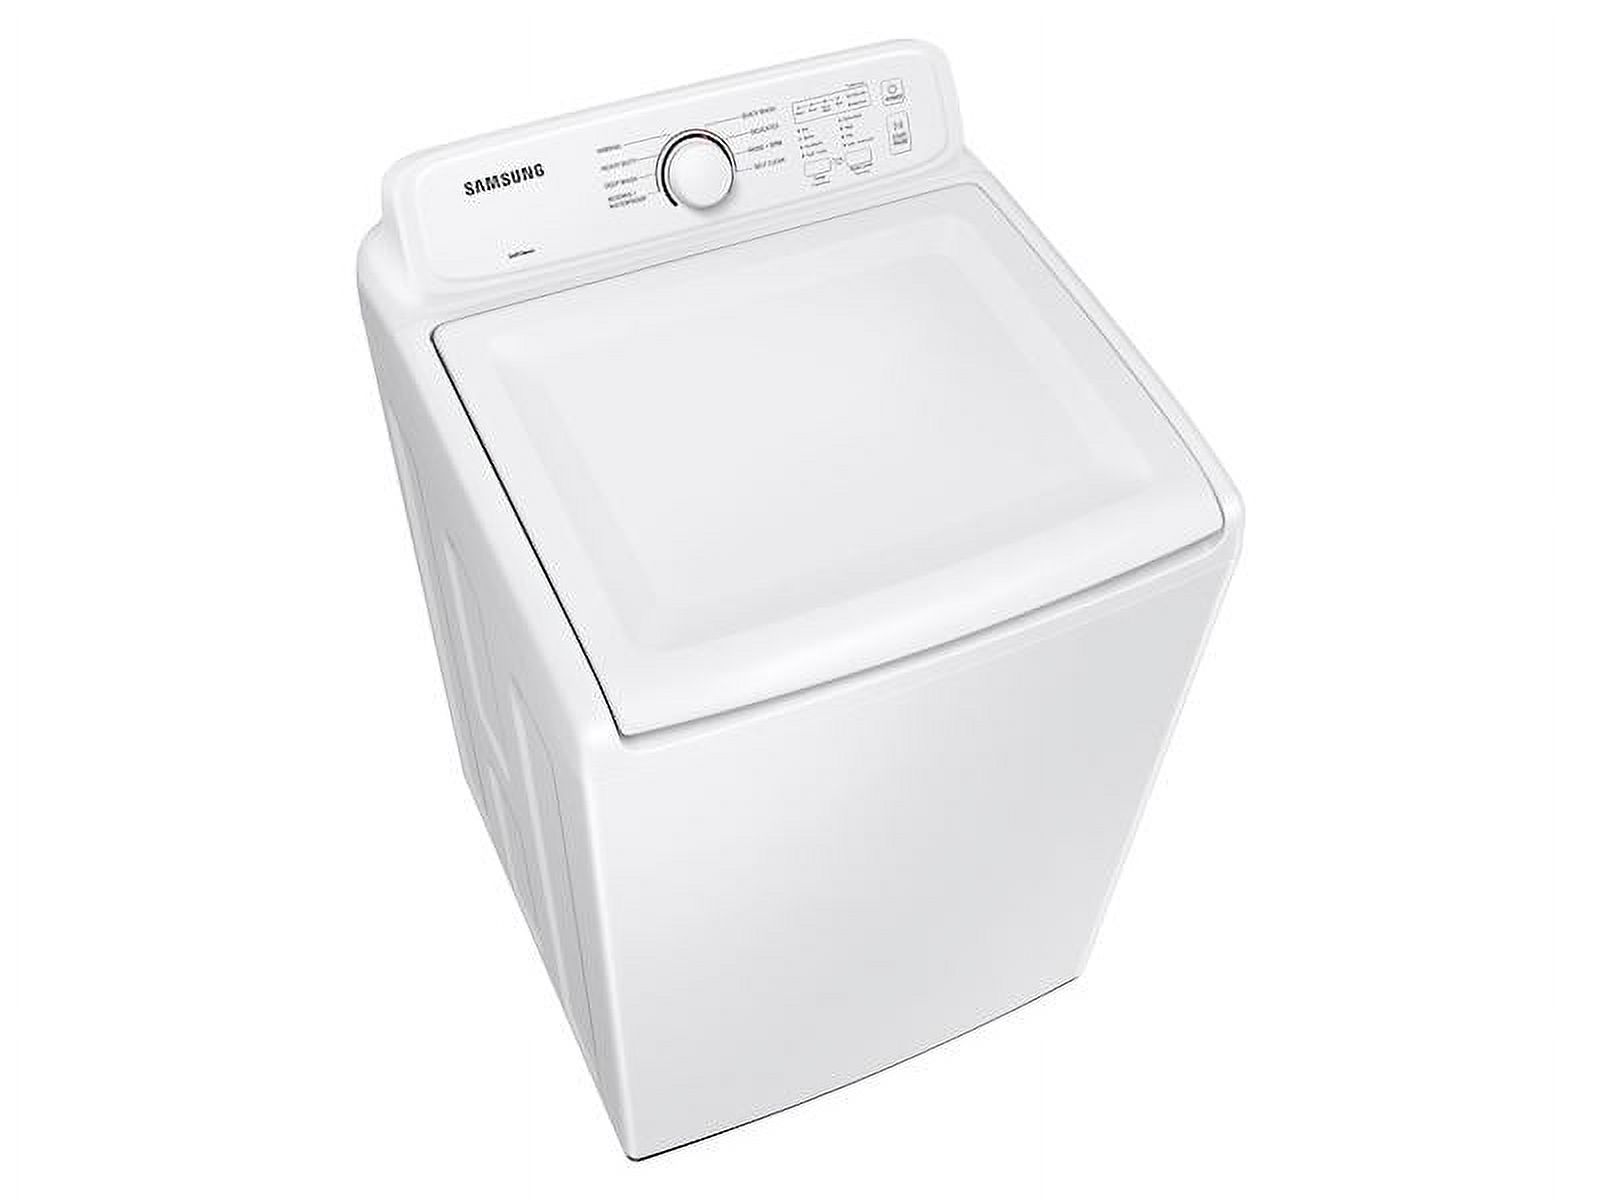 Samsung WA40A3005AW 4.0 Cu. Ft. High-Efficiency Top Load Washer - White - image 4 of 5